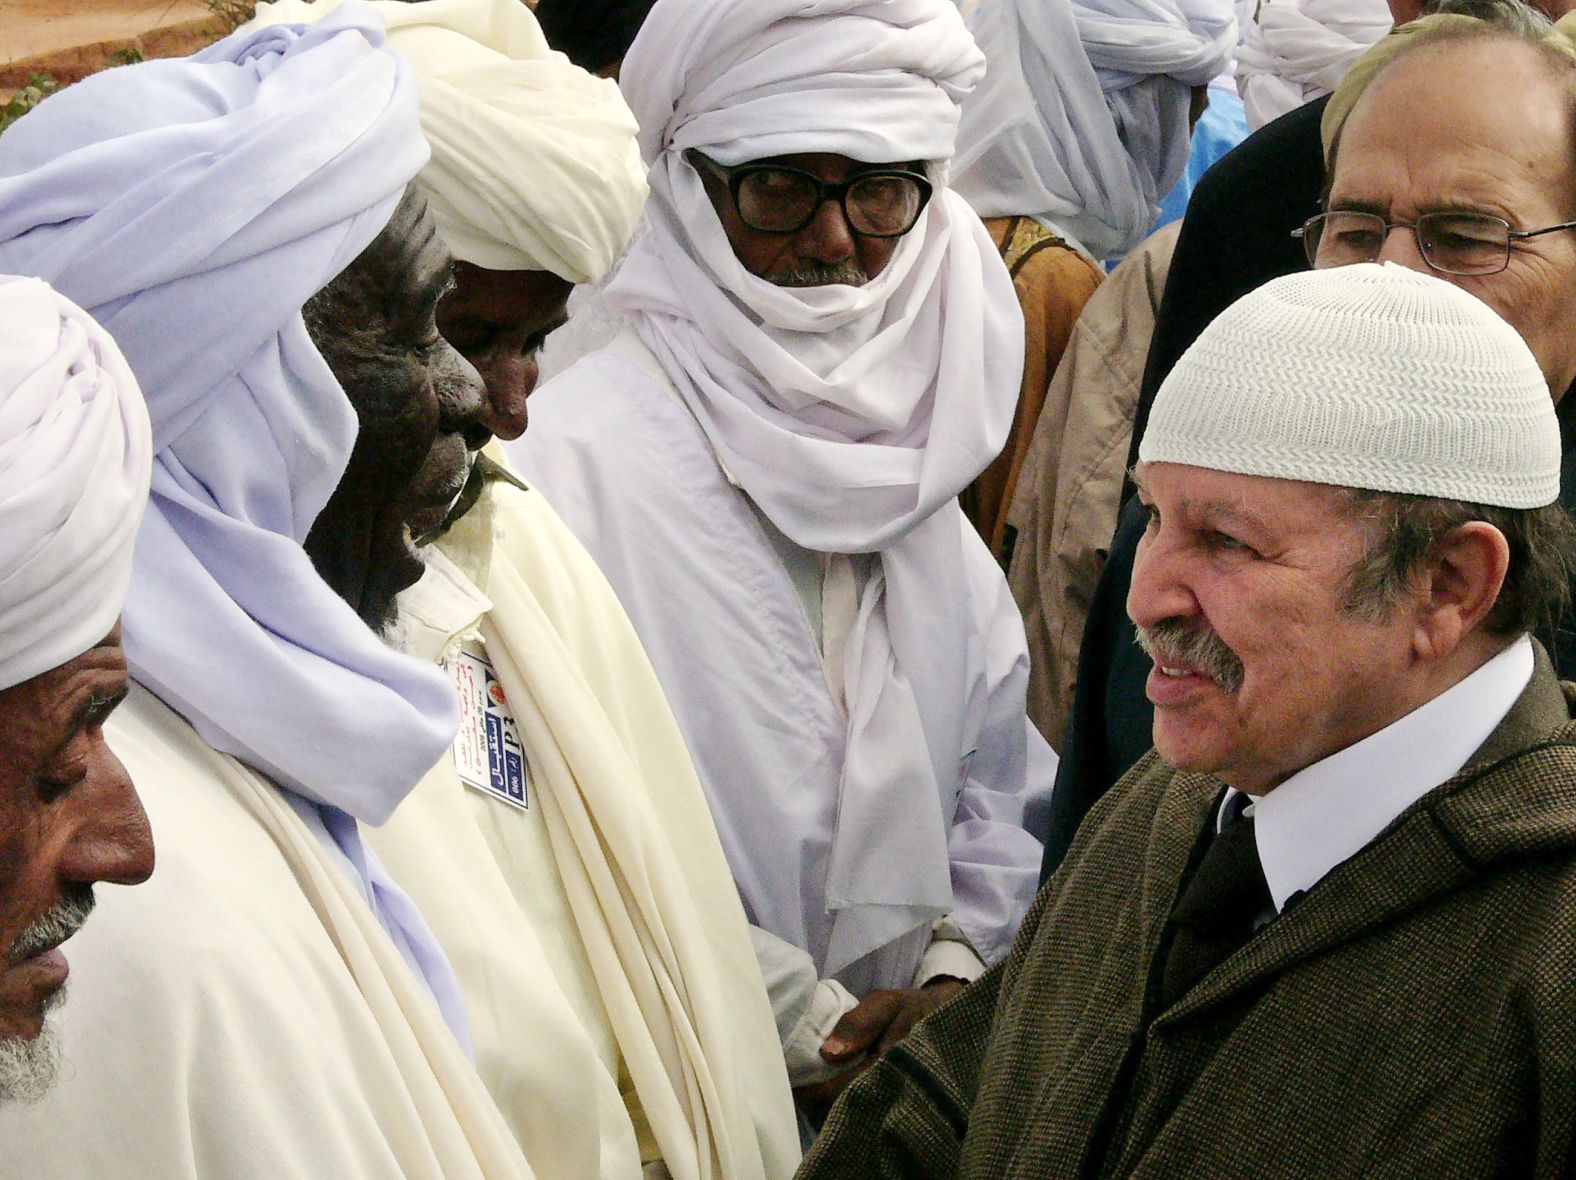 Bouteflika meets Touareg men in the Algerian town of In Salah during a visit to the Sahara desert region in January 2008. Just a few months earlier, Bouteflika narrowly escaped a bomb attack in the eastern city of Batna that killed at least 22 people waiting to see him.